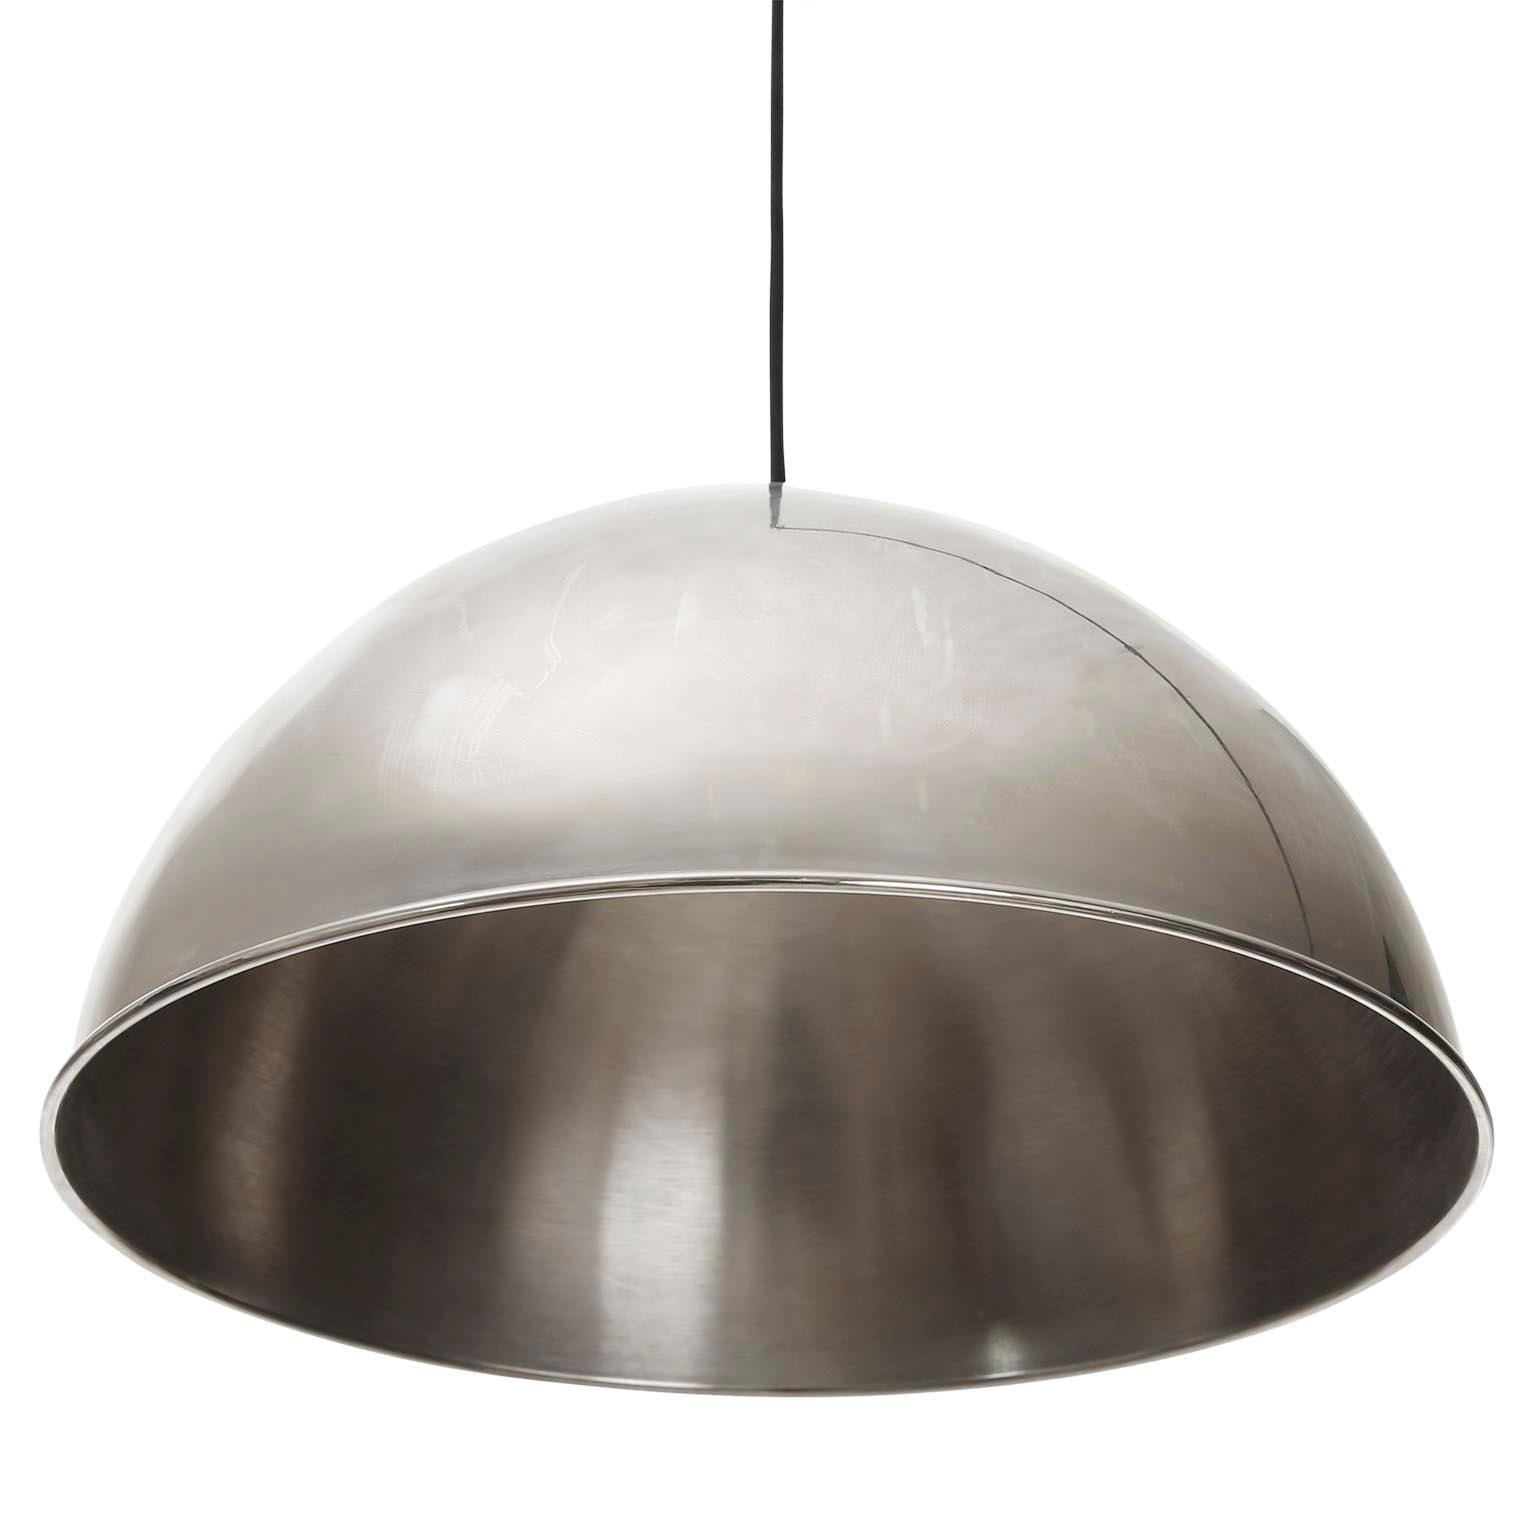 Plated Florian Schulz Pendant Light Counterweight Counterbalance Patinated Nickel, 1970 For Sale